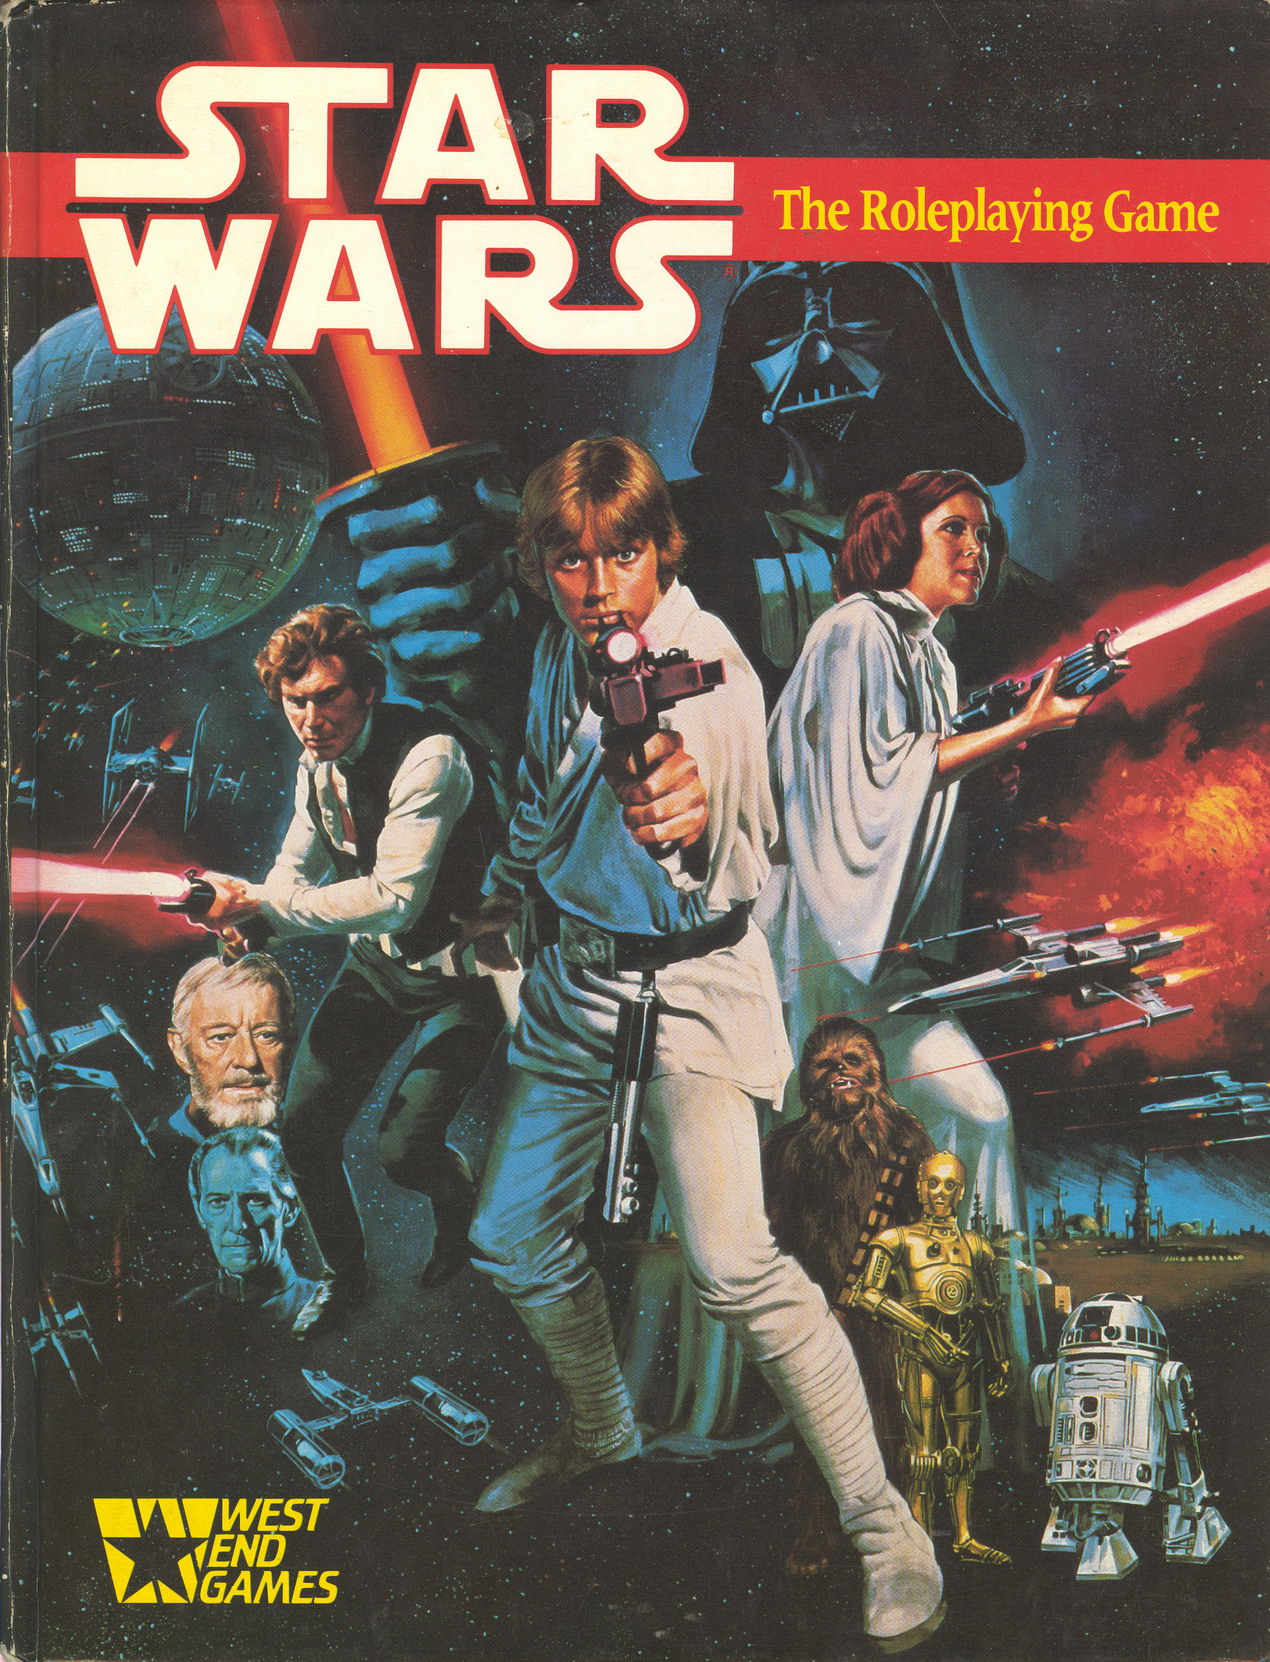 Scum And Villainy (Star Wars Roleplaying Game) Robert J. Schwalb